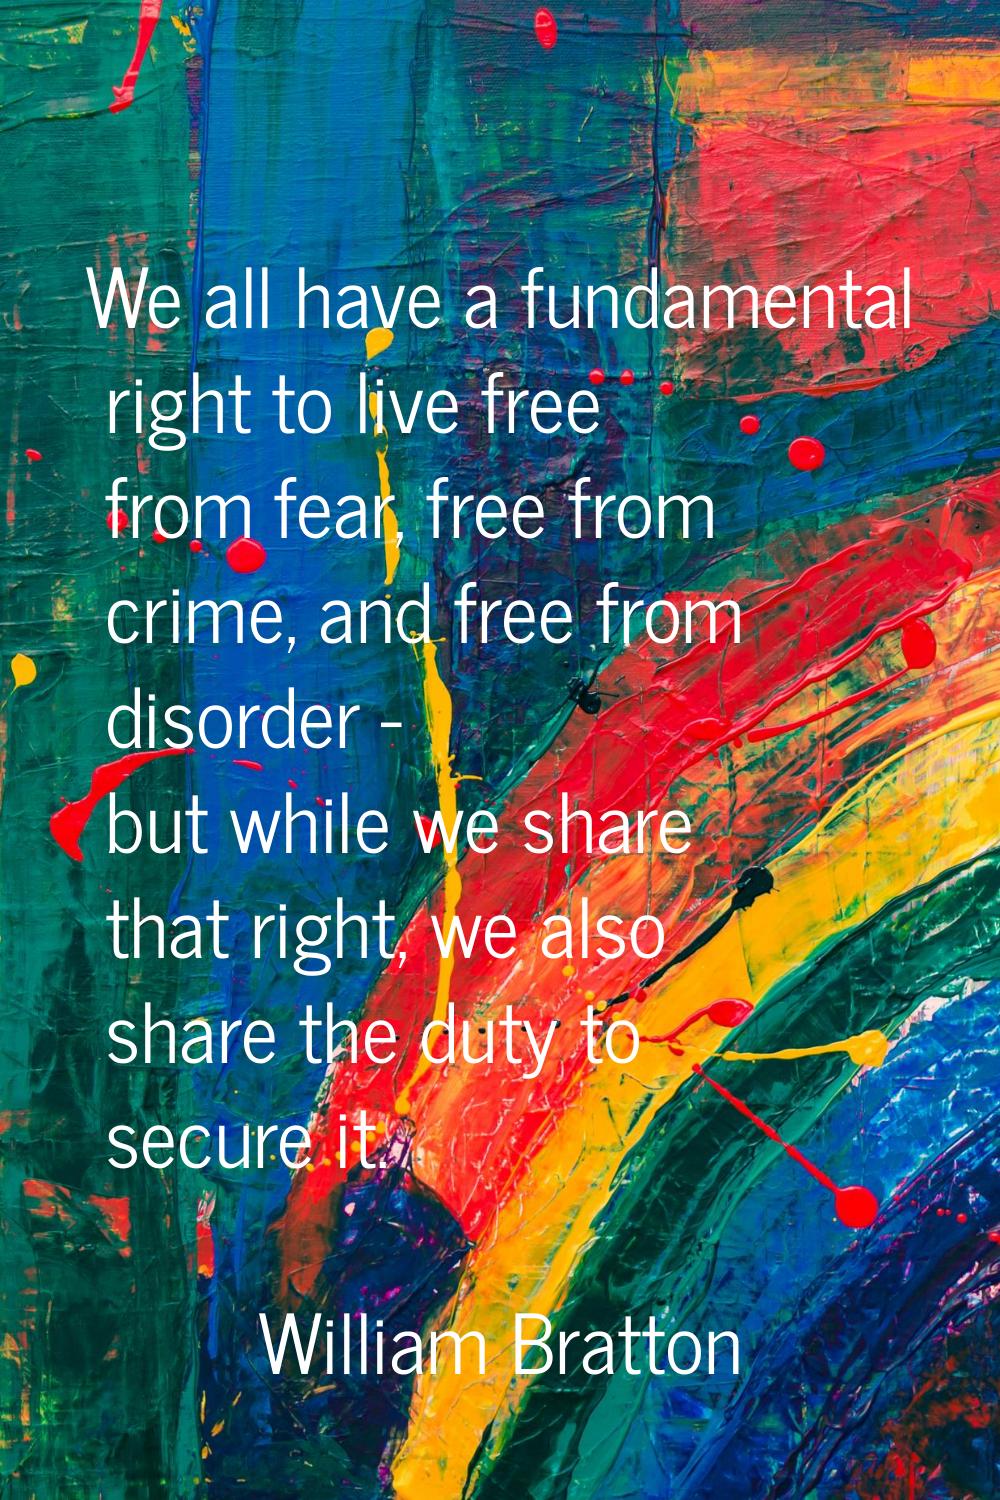 We all have a fundamental right to live free from fear, free from crime, and free from disorder - b